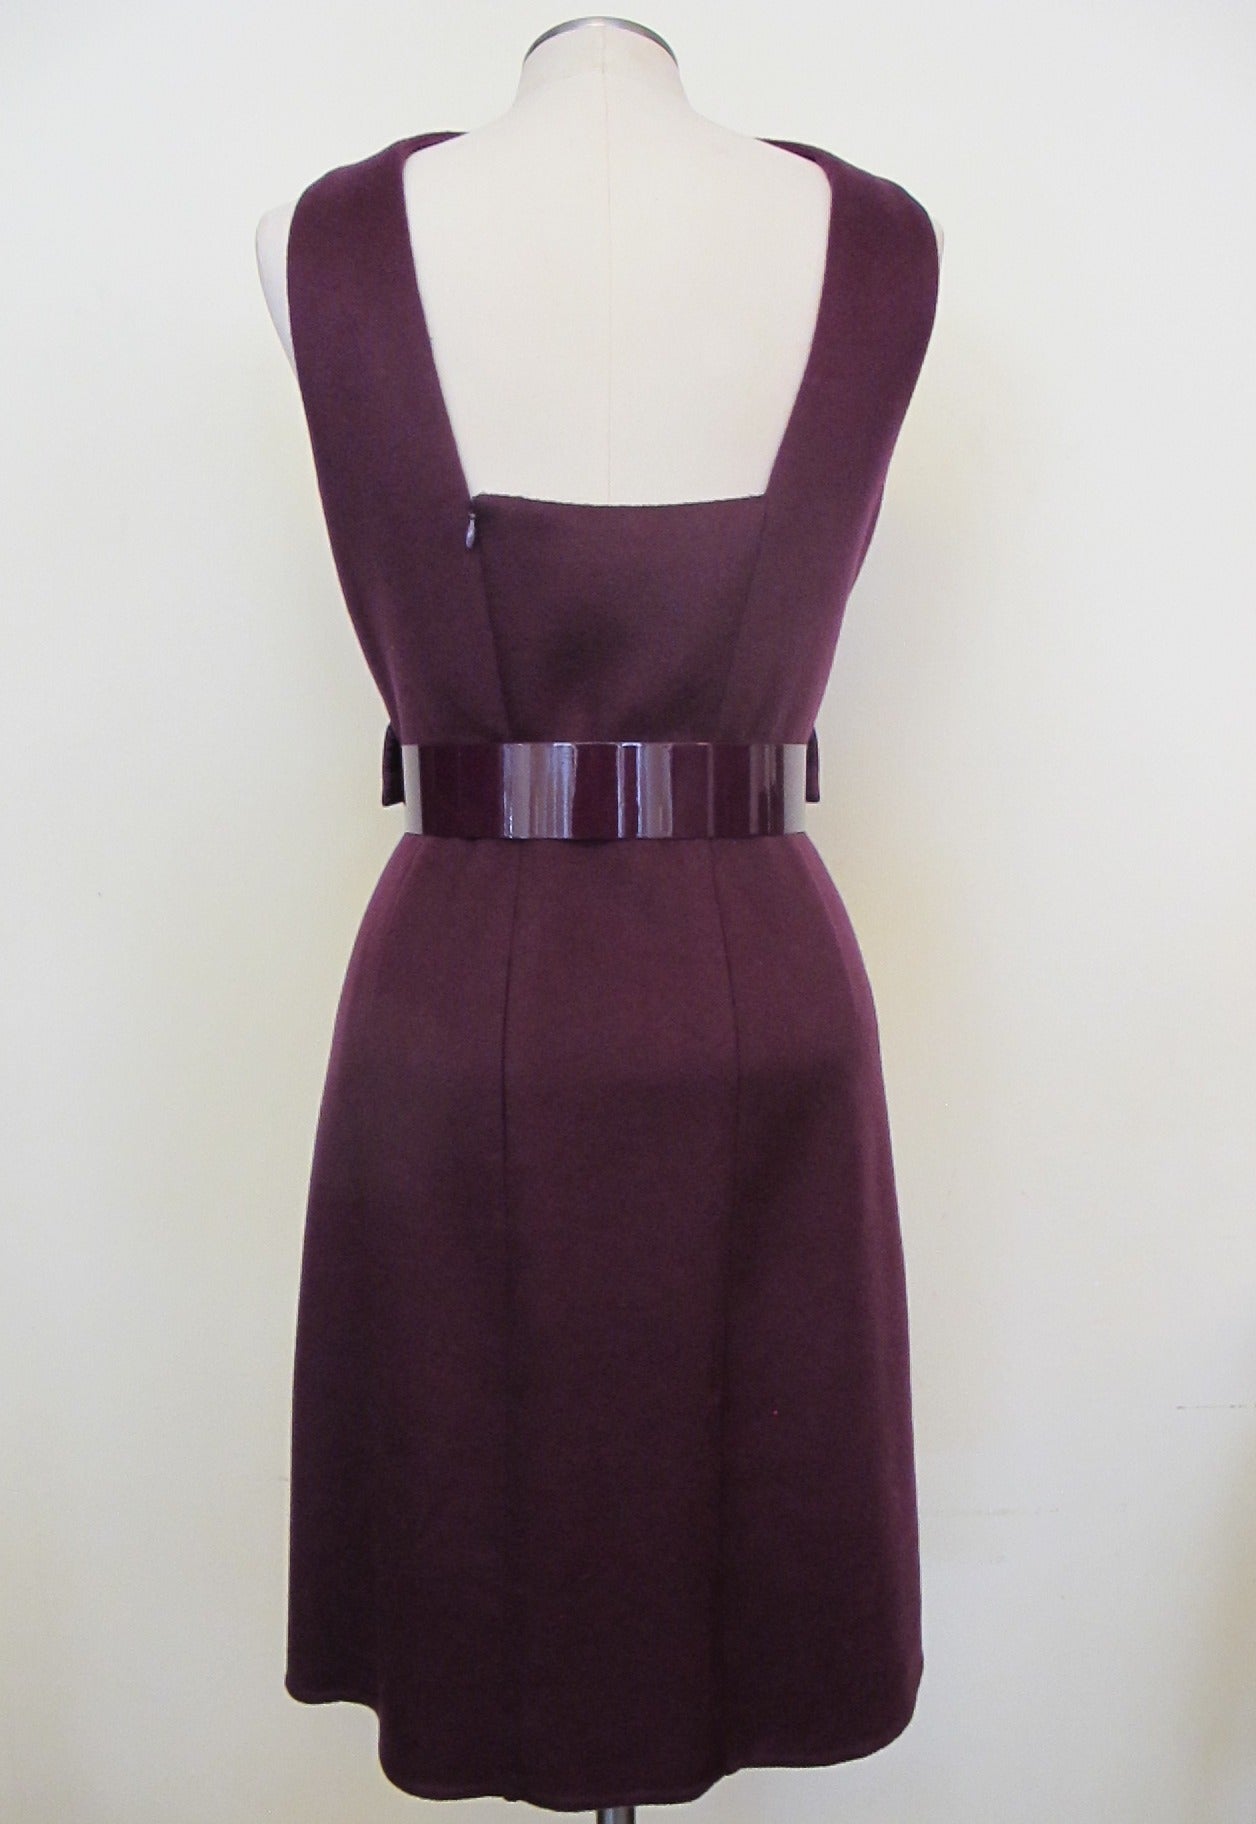 Akris Exquisite Plum Cashmere Dress In New Condition For Sale In San Francisco, CA